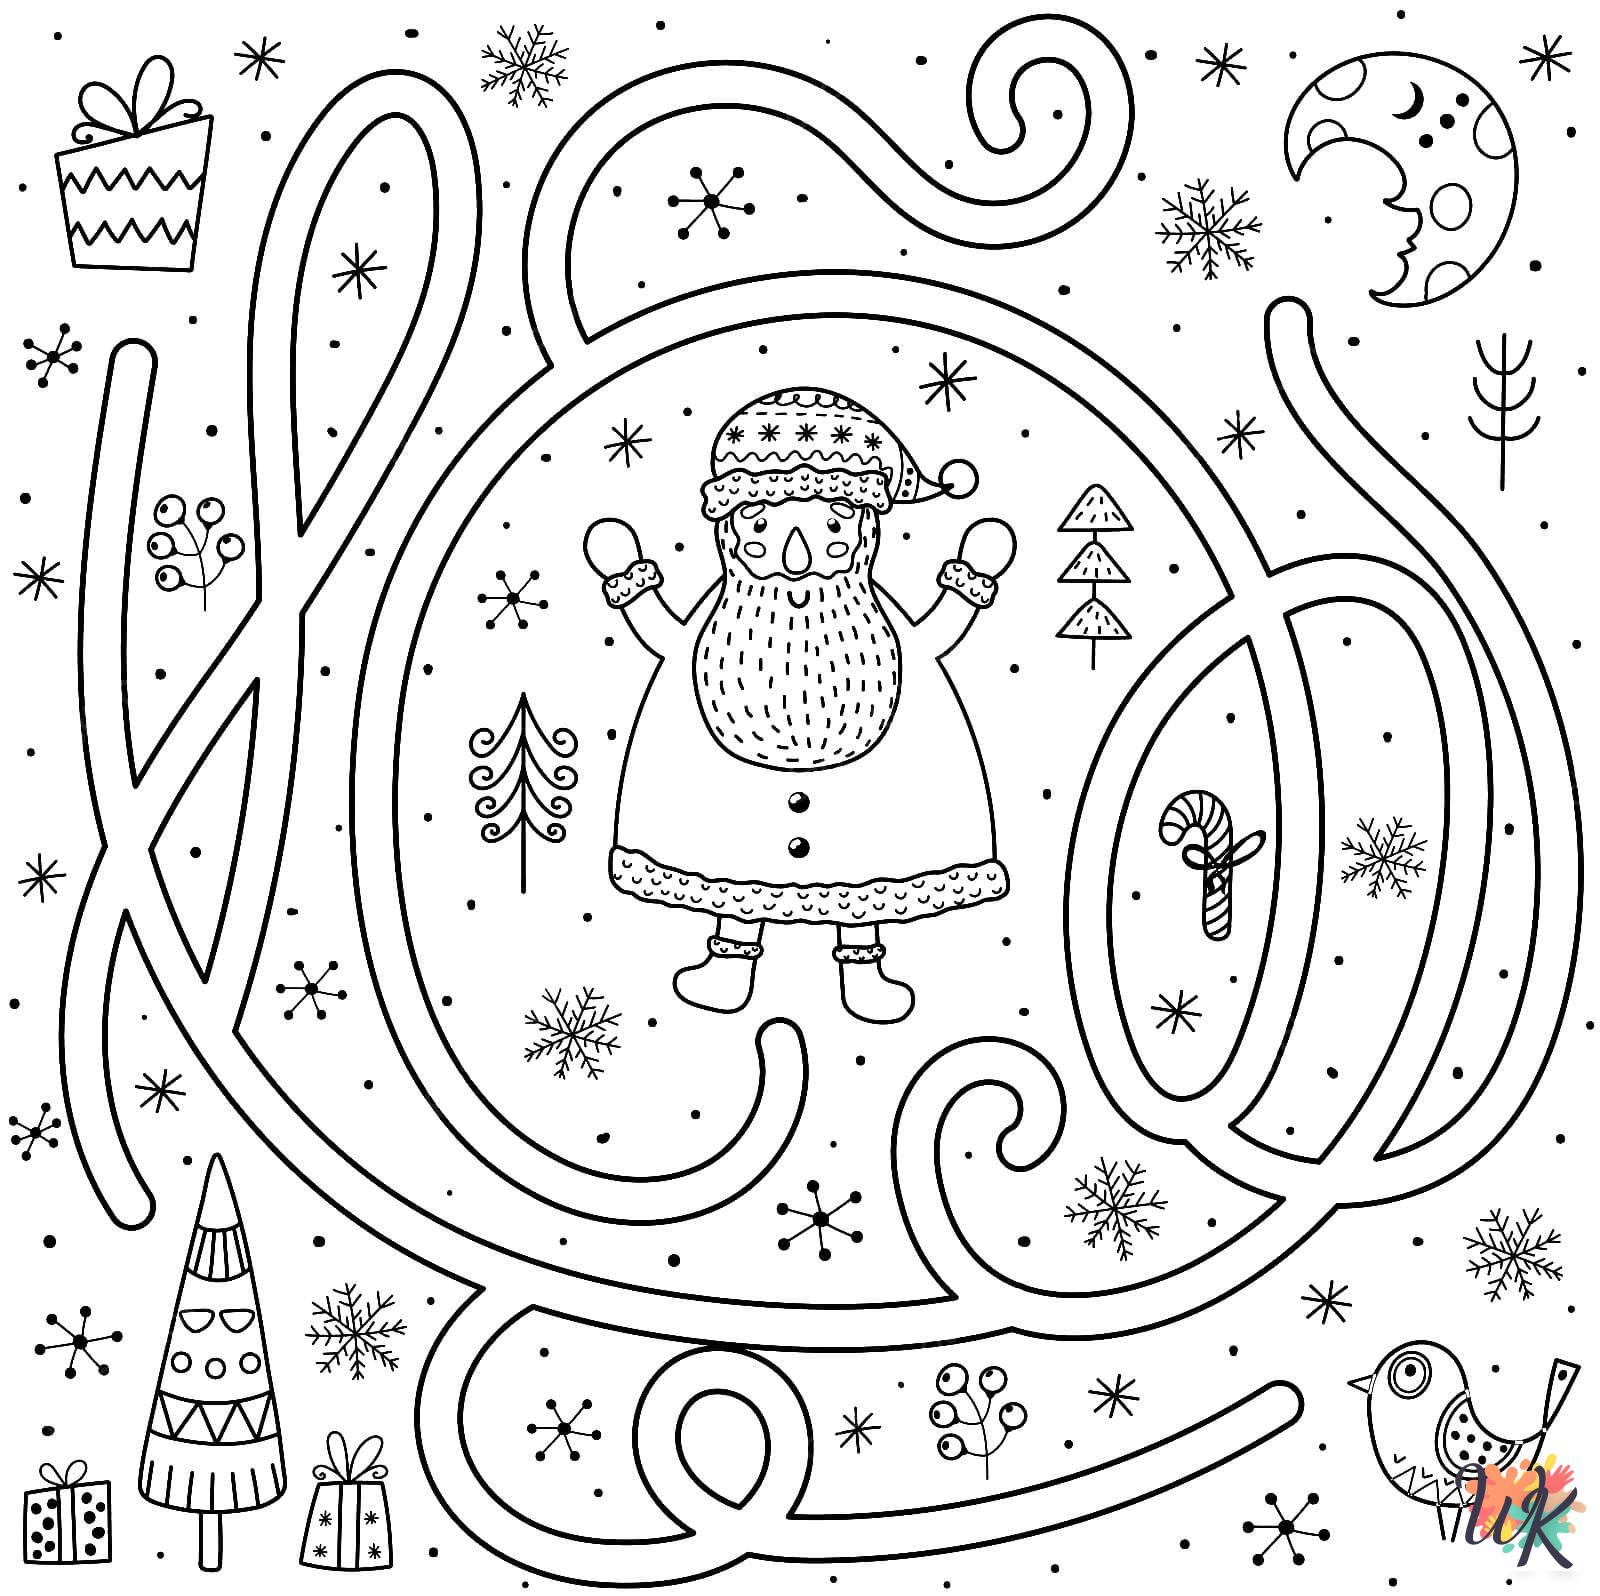 Santa cards coloring pages